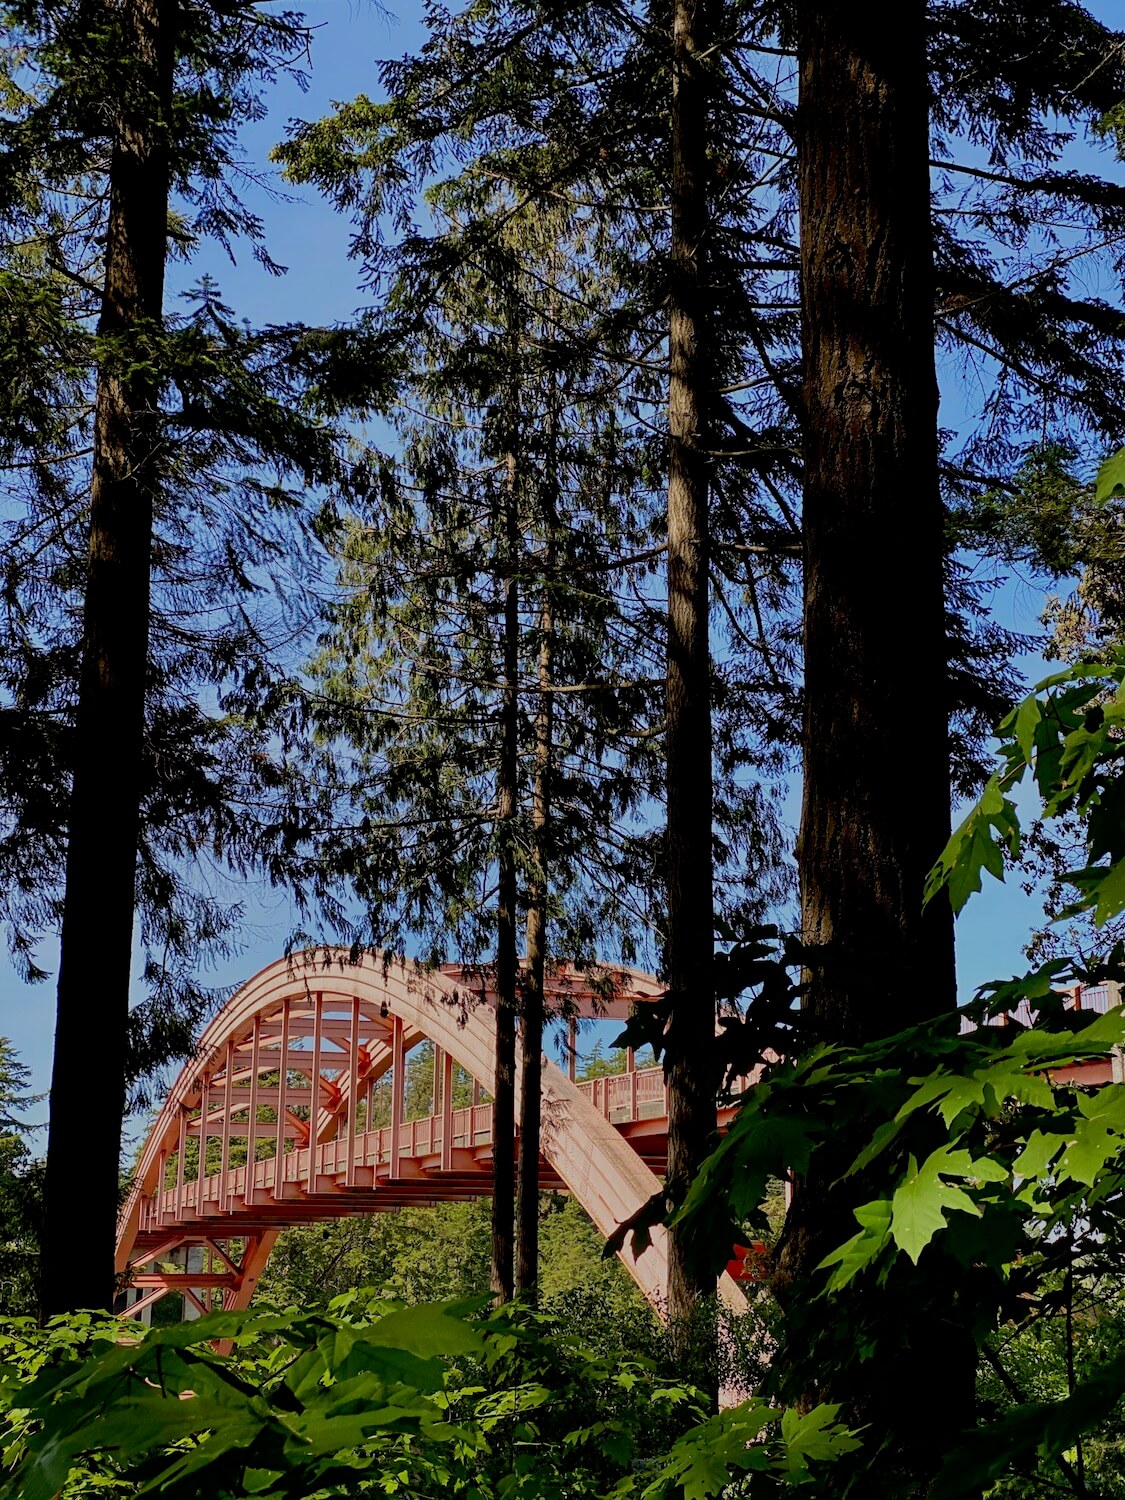 The pink hues of the Rainbow Bridge which connects the town of La Conner, Washington with the Swinomish Village.  The semi-circle metal structure can be seen through the forest of fir trees. 